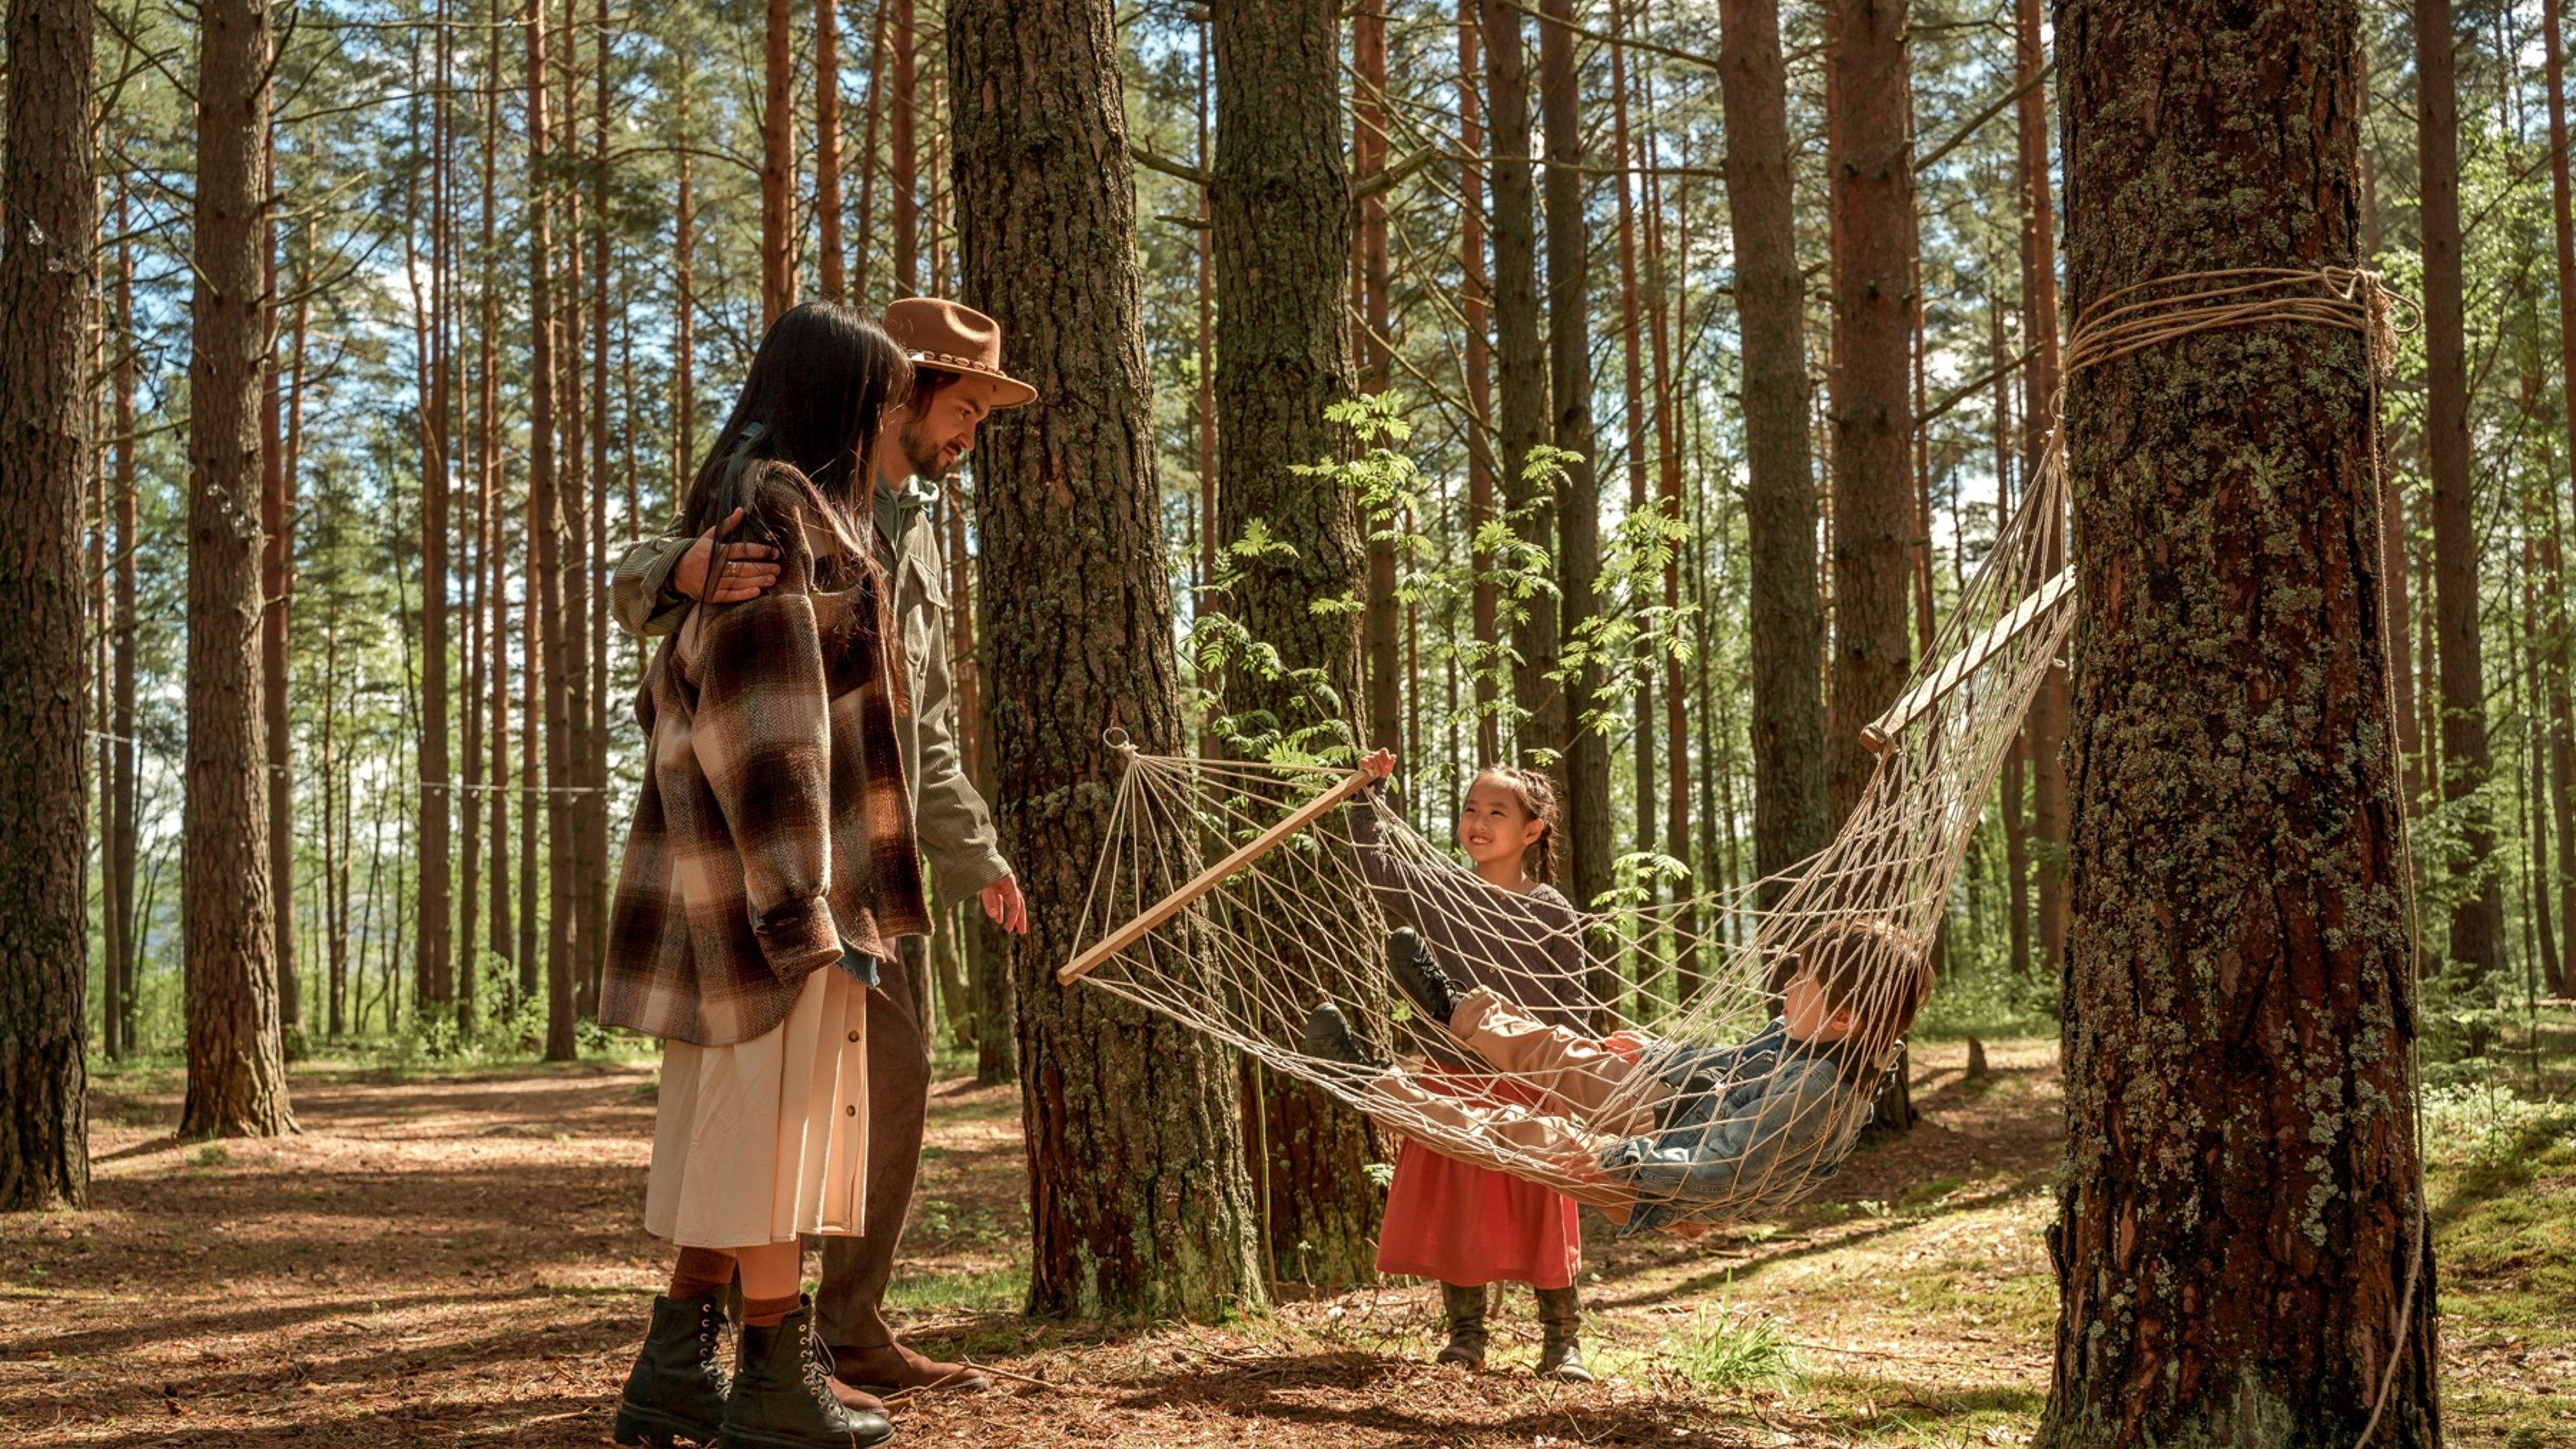 Family with a Hammock